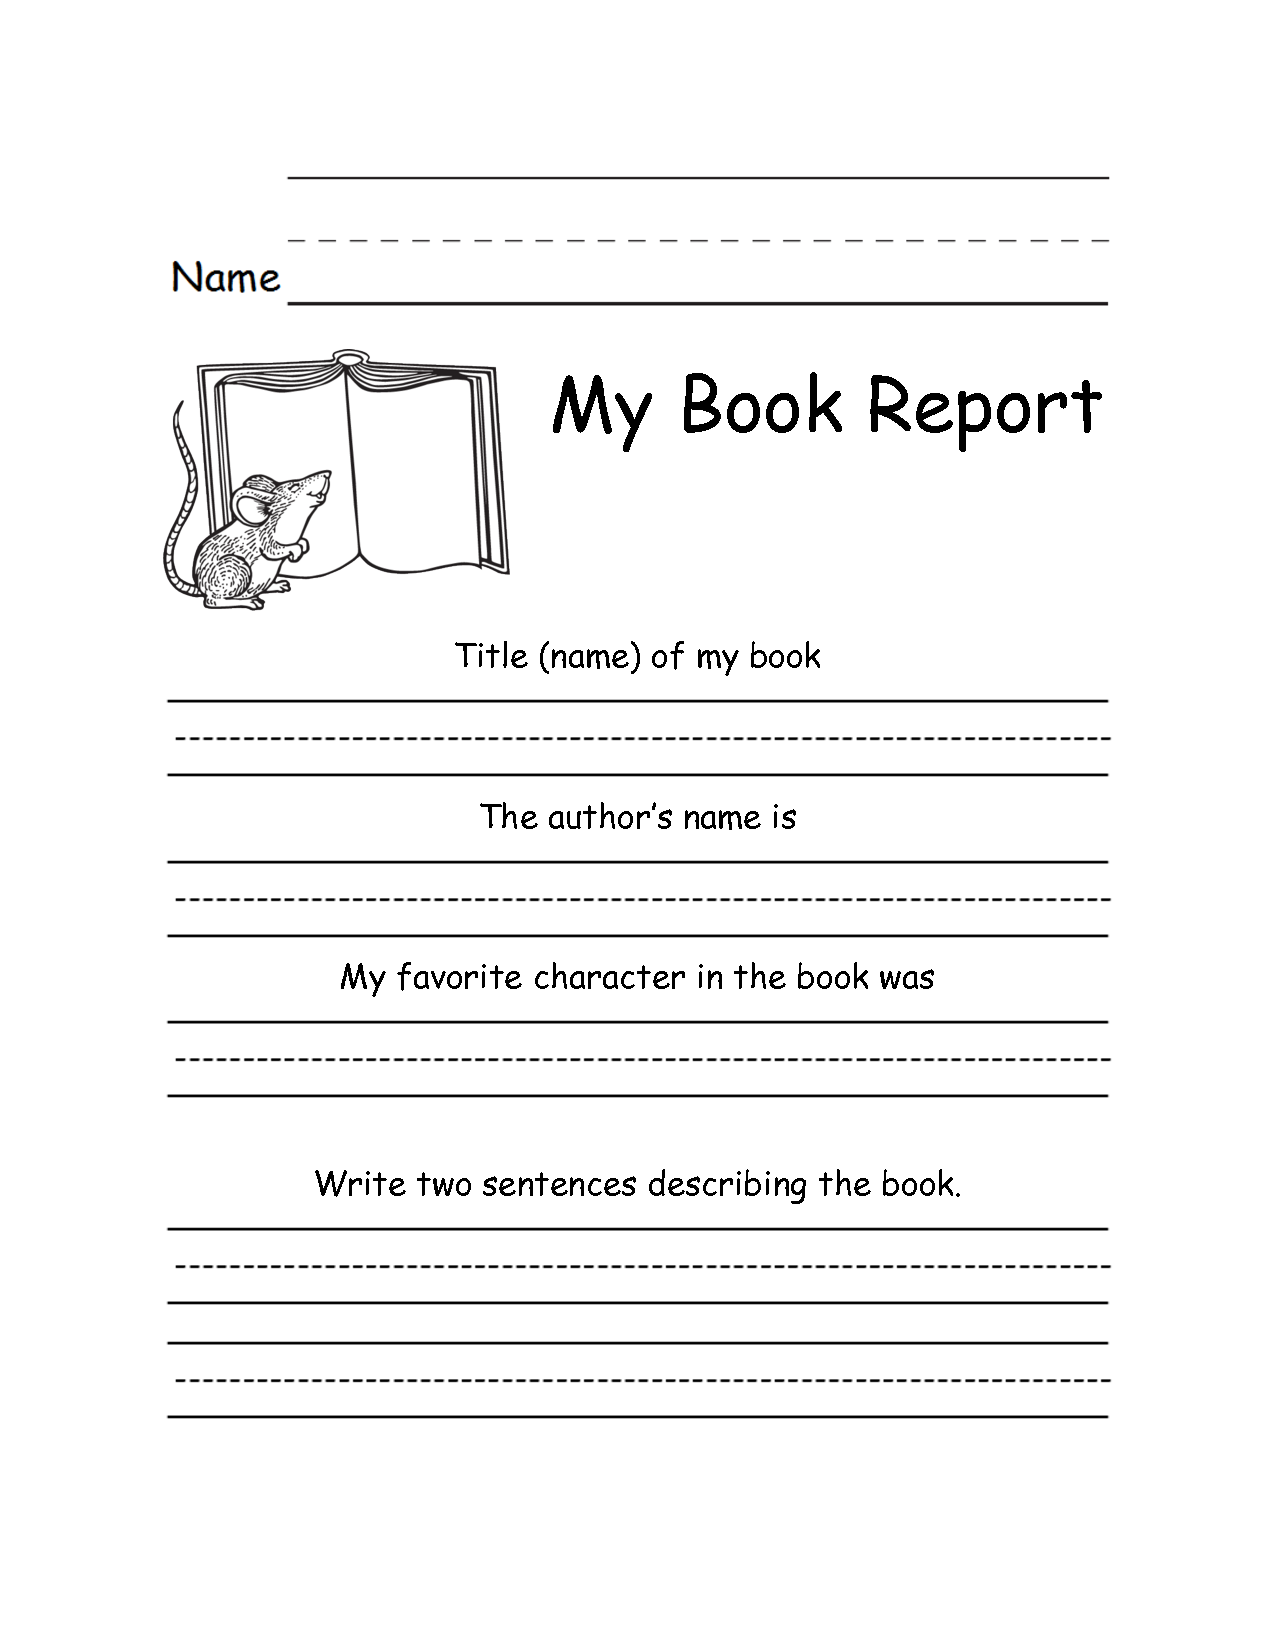 Simple book report form. Good summer activity for Daniel to 